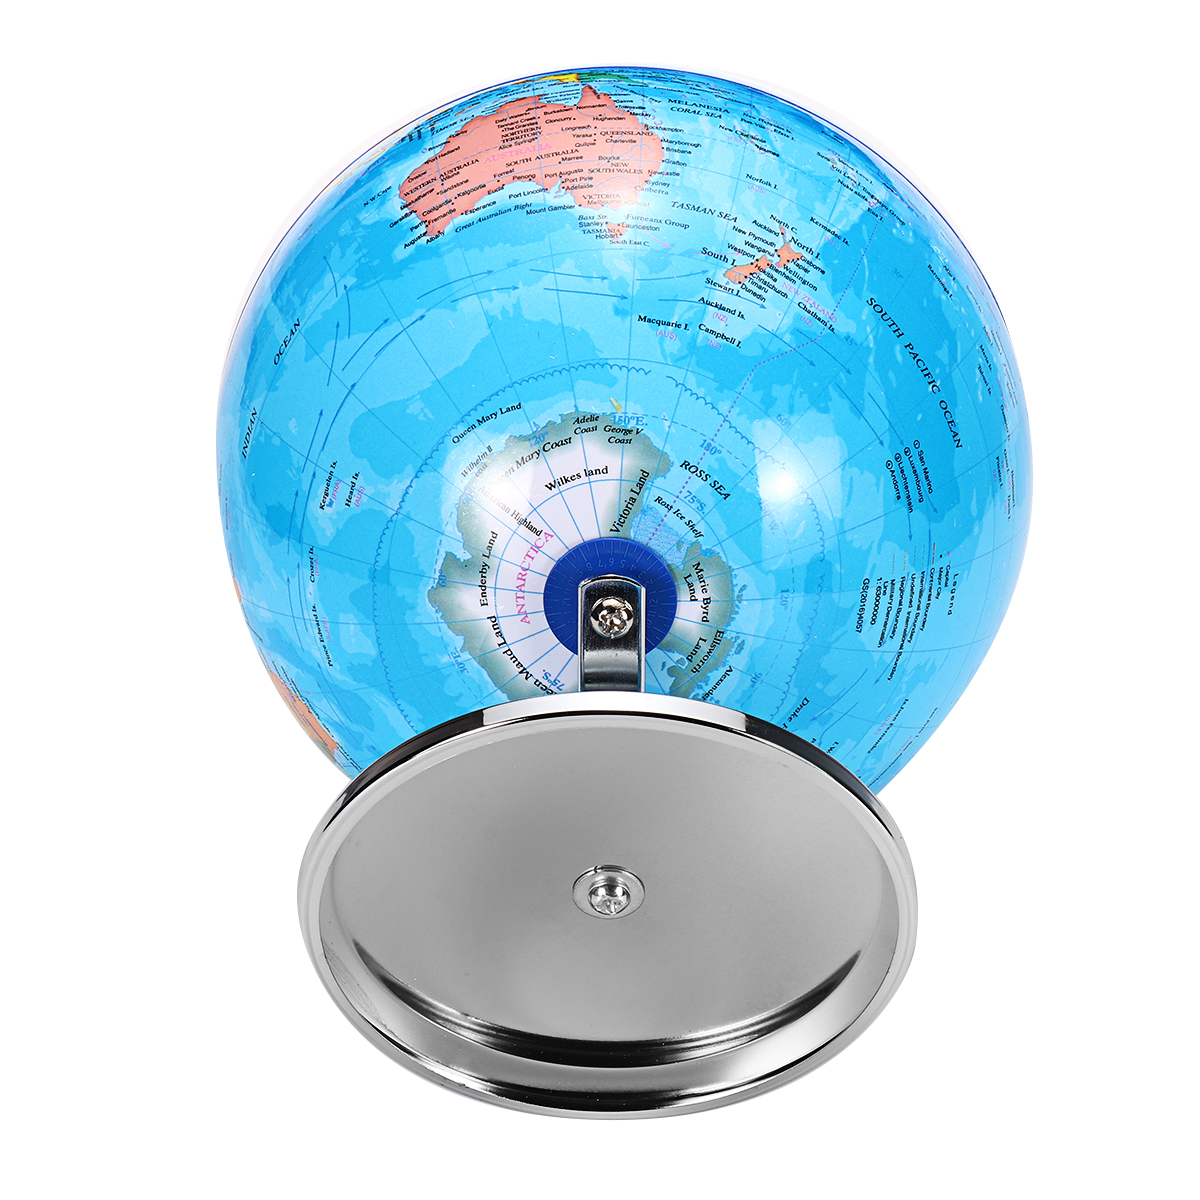 8inch-Stand-Rotating-World-Globe-Map-Kids-Toy-School-Student-Educational-Gift-1783975-8